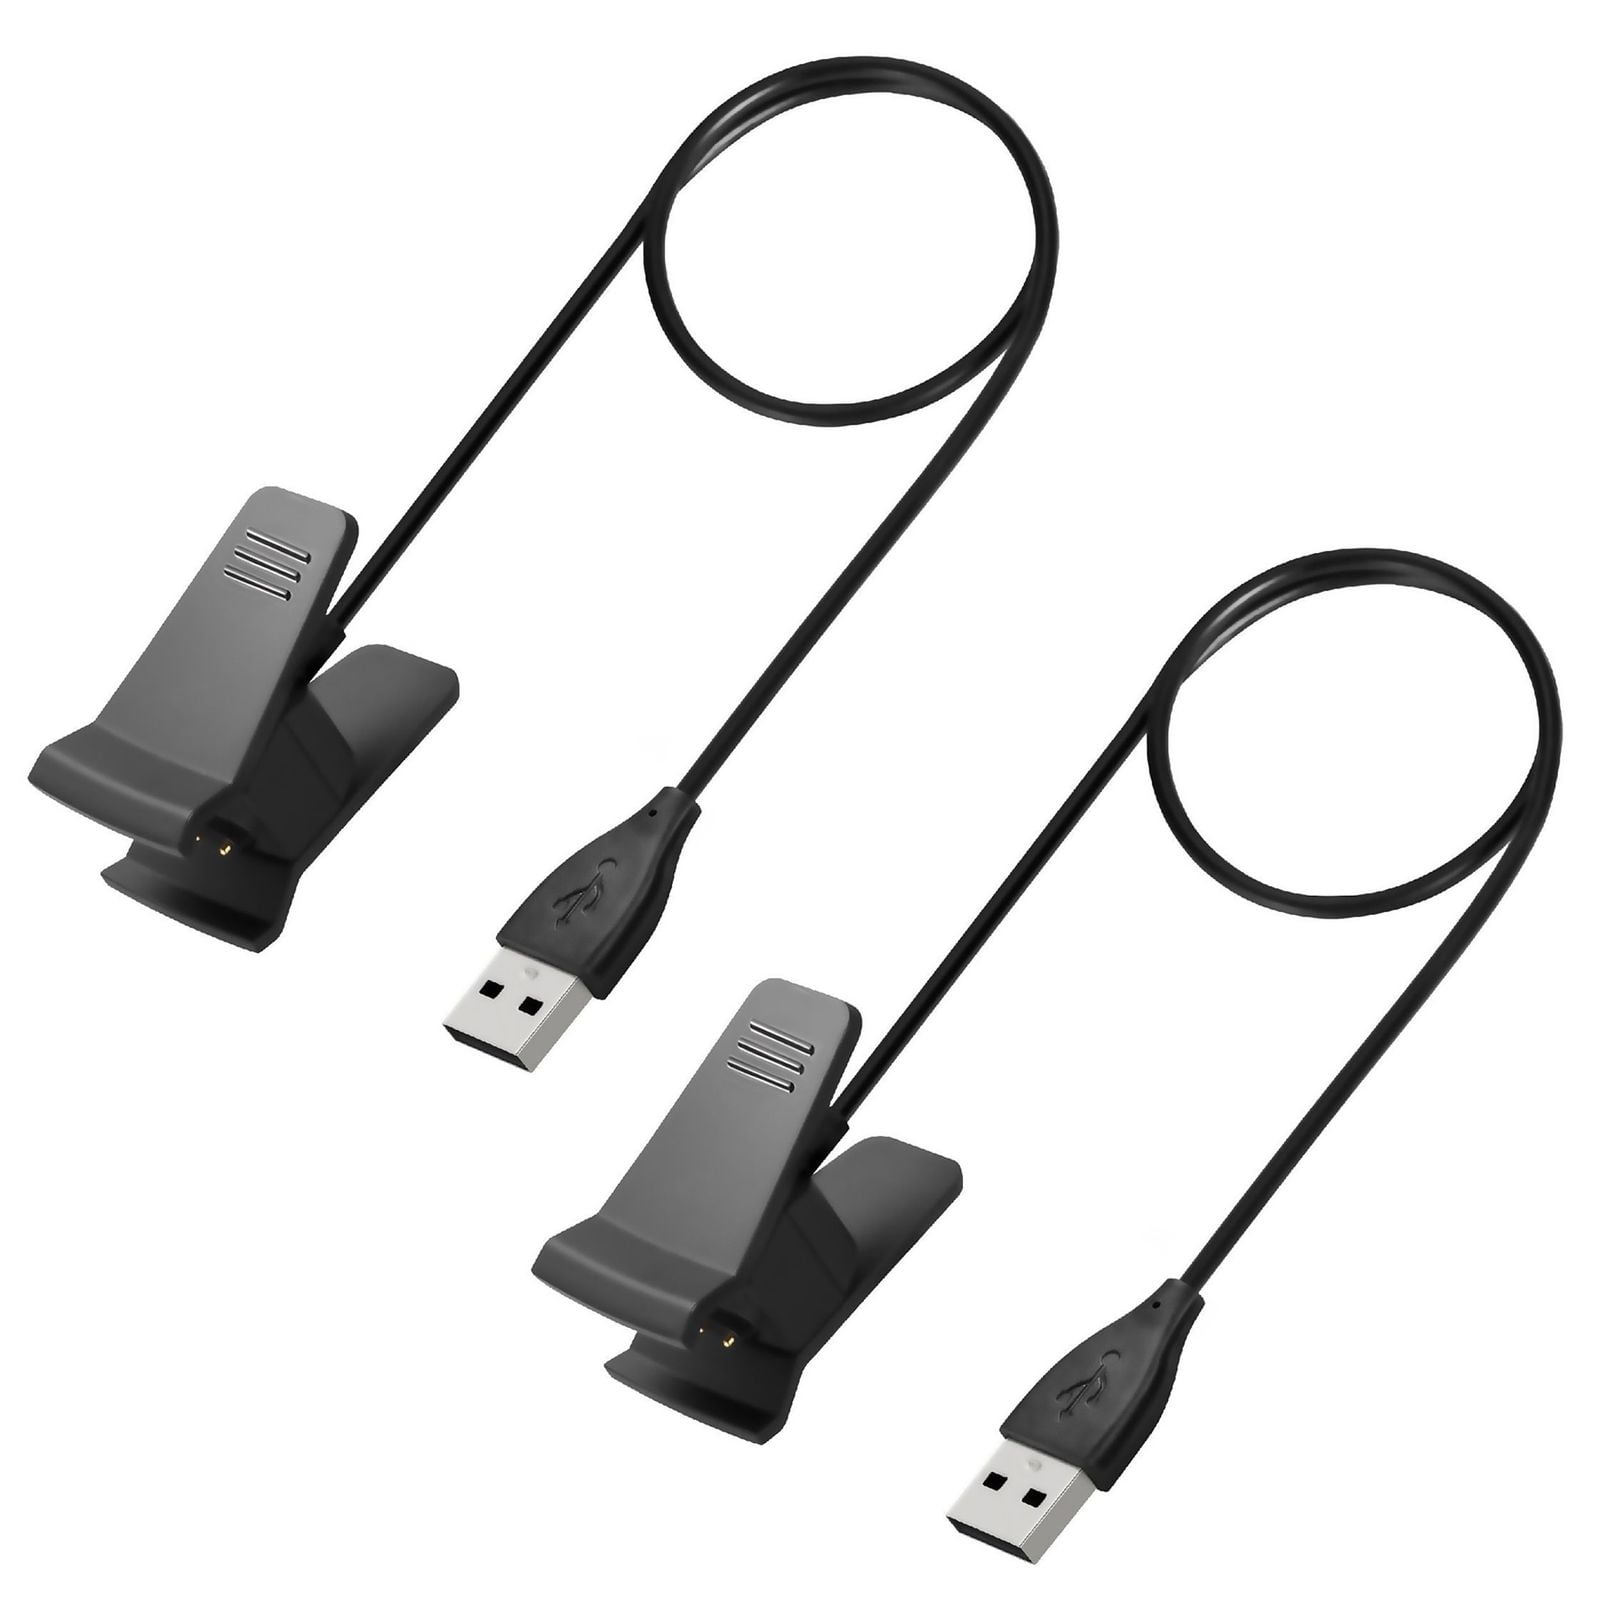 Fitbit ALTA HR Charging Cable Fb163rcc2 for sale online 